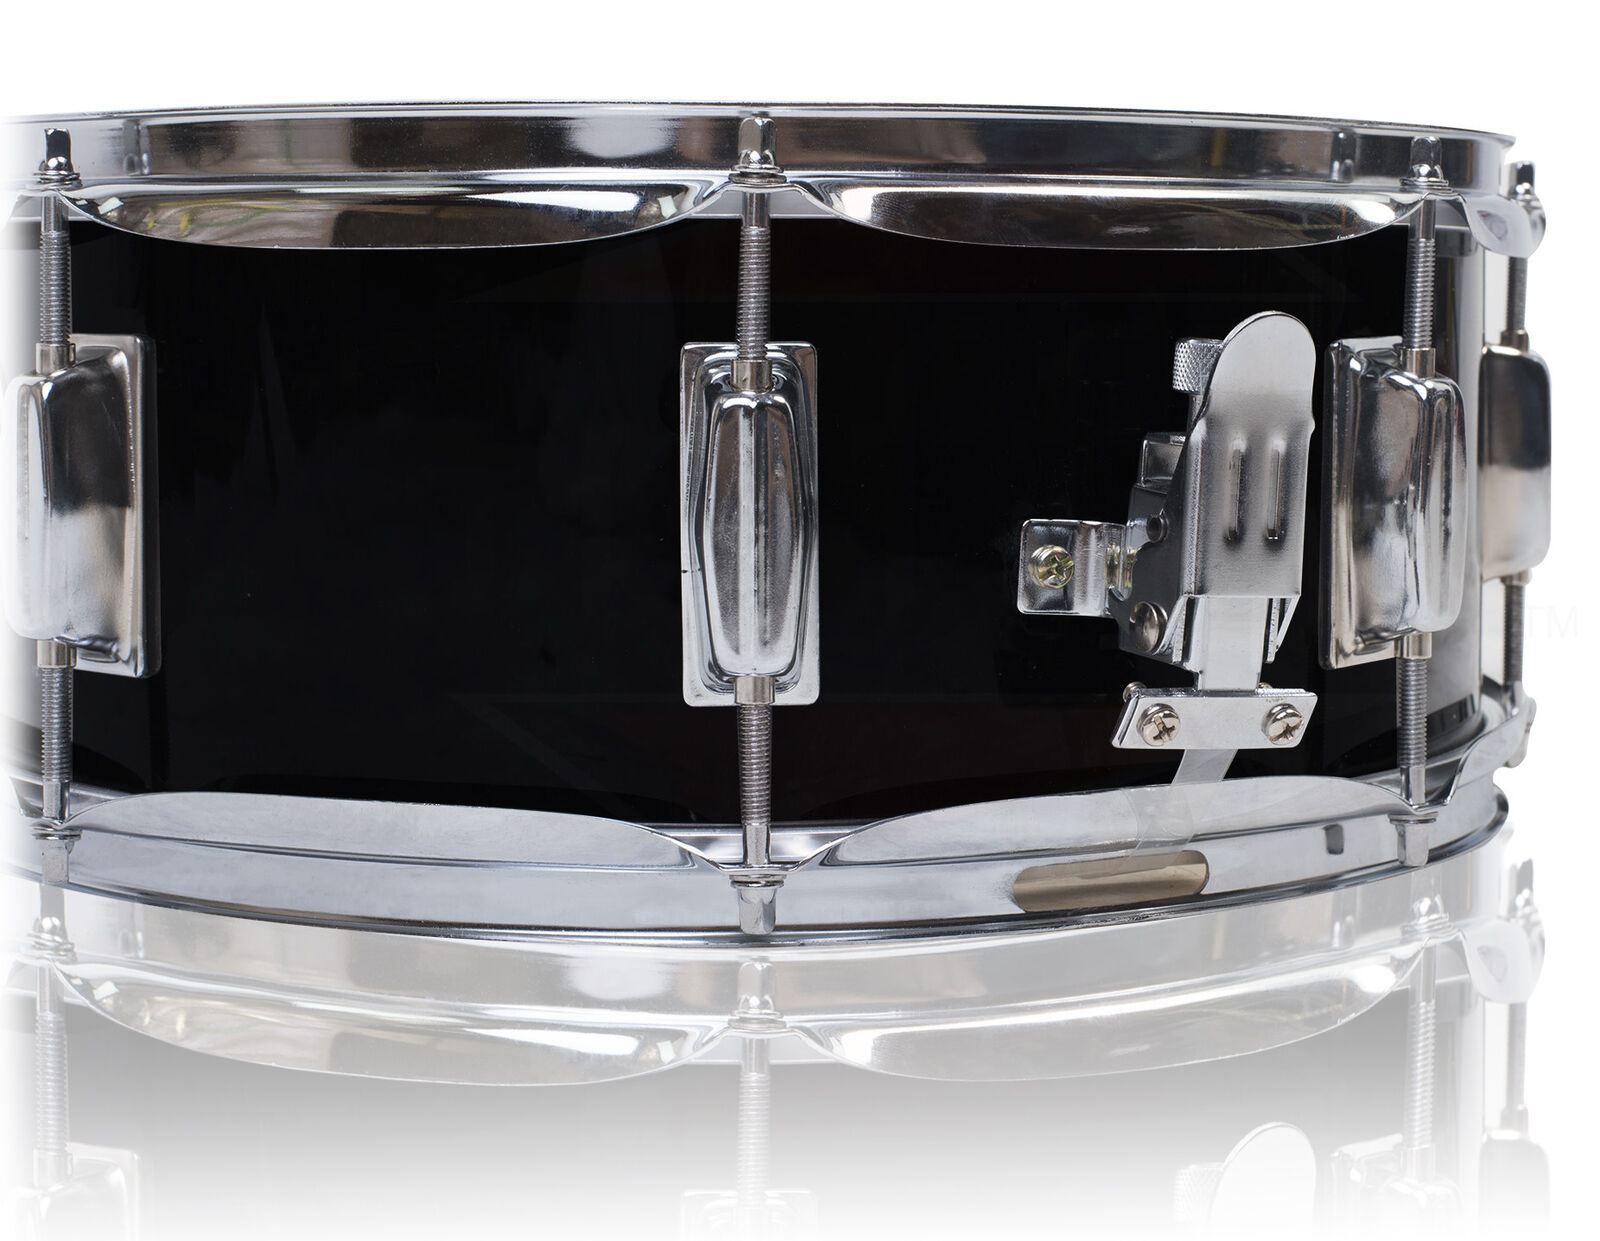 GRIFFIN Snare Drum – Black 14″x5.5 Poplar Wood Shell Acoustic Percussion Kit Set 3